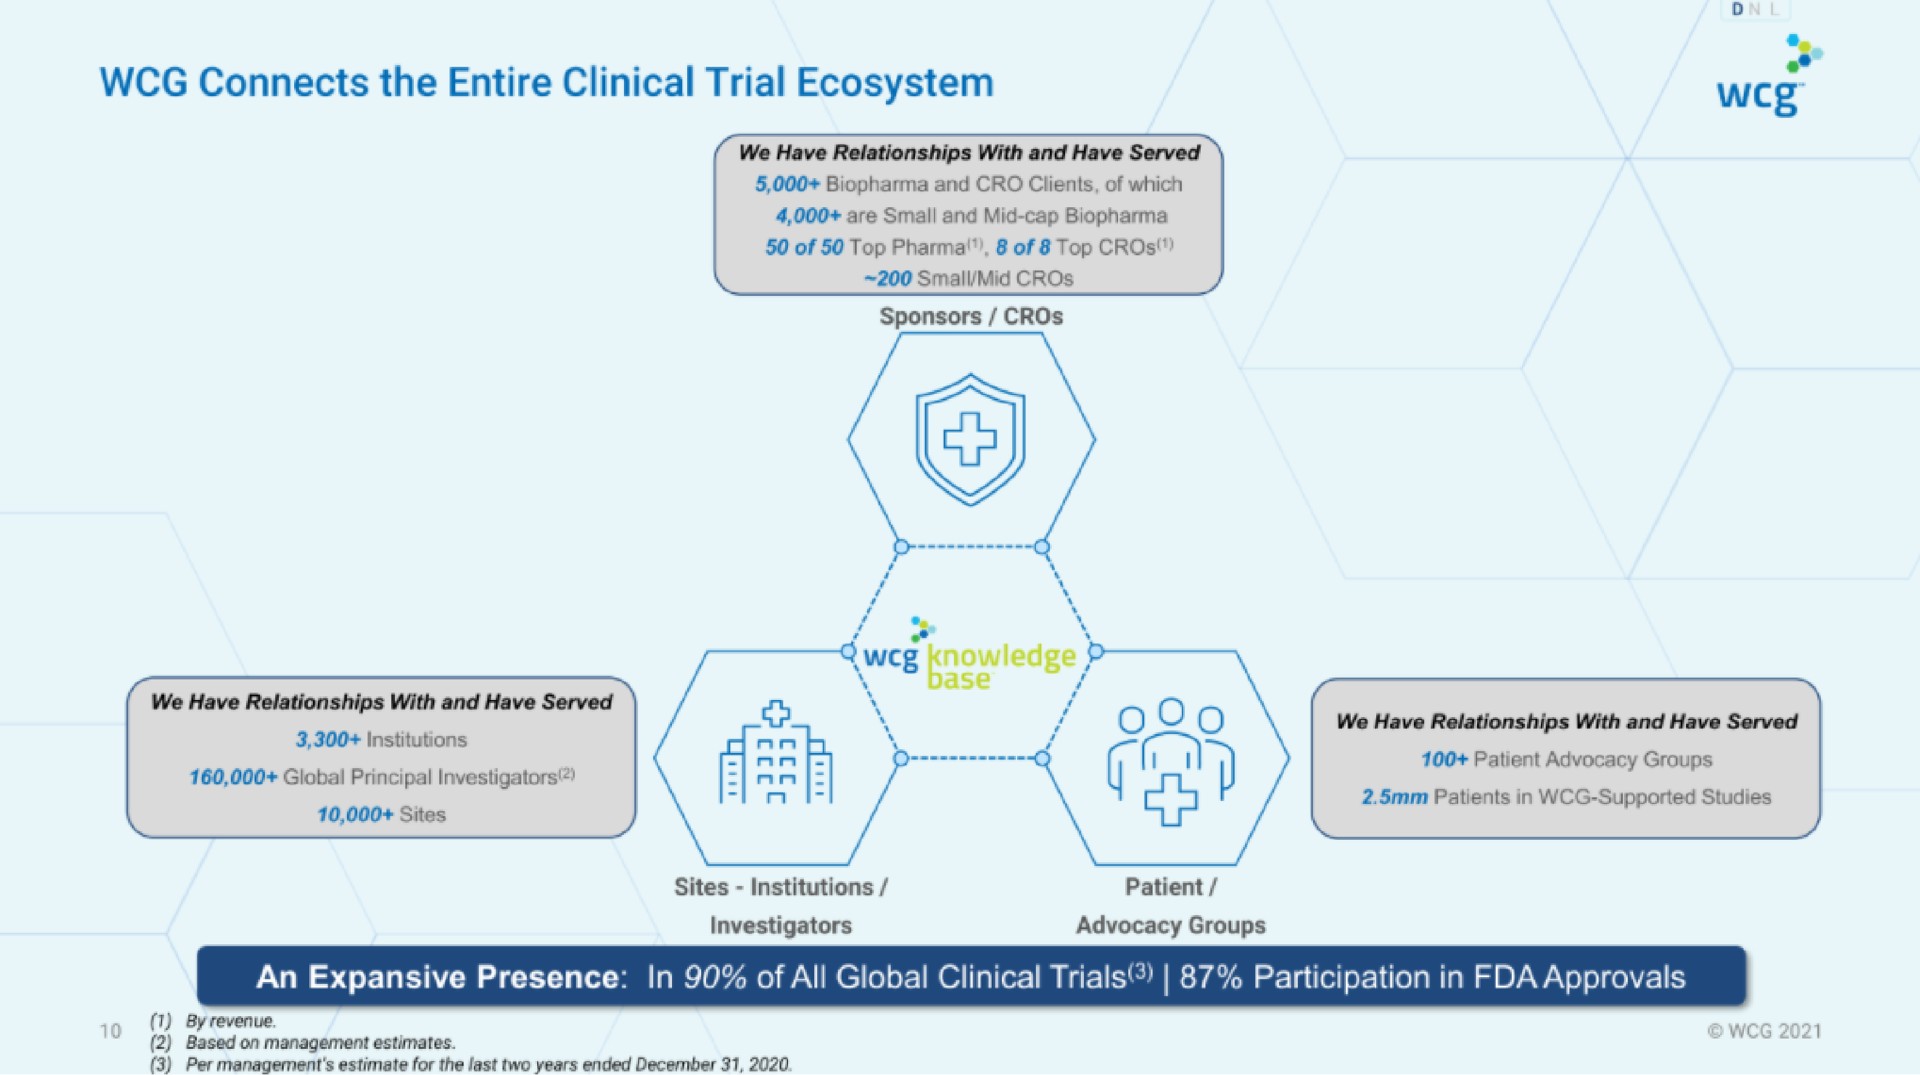 connects the entire clinical trial ecosystem | WCG